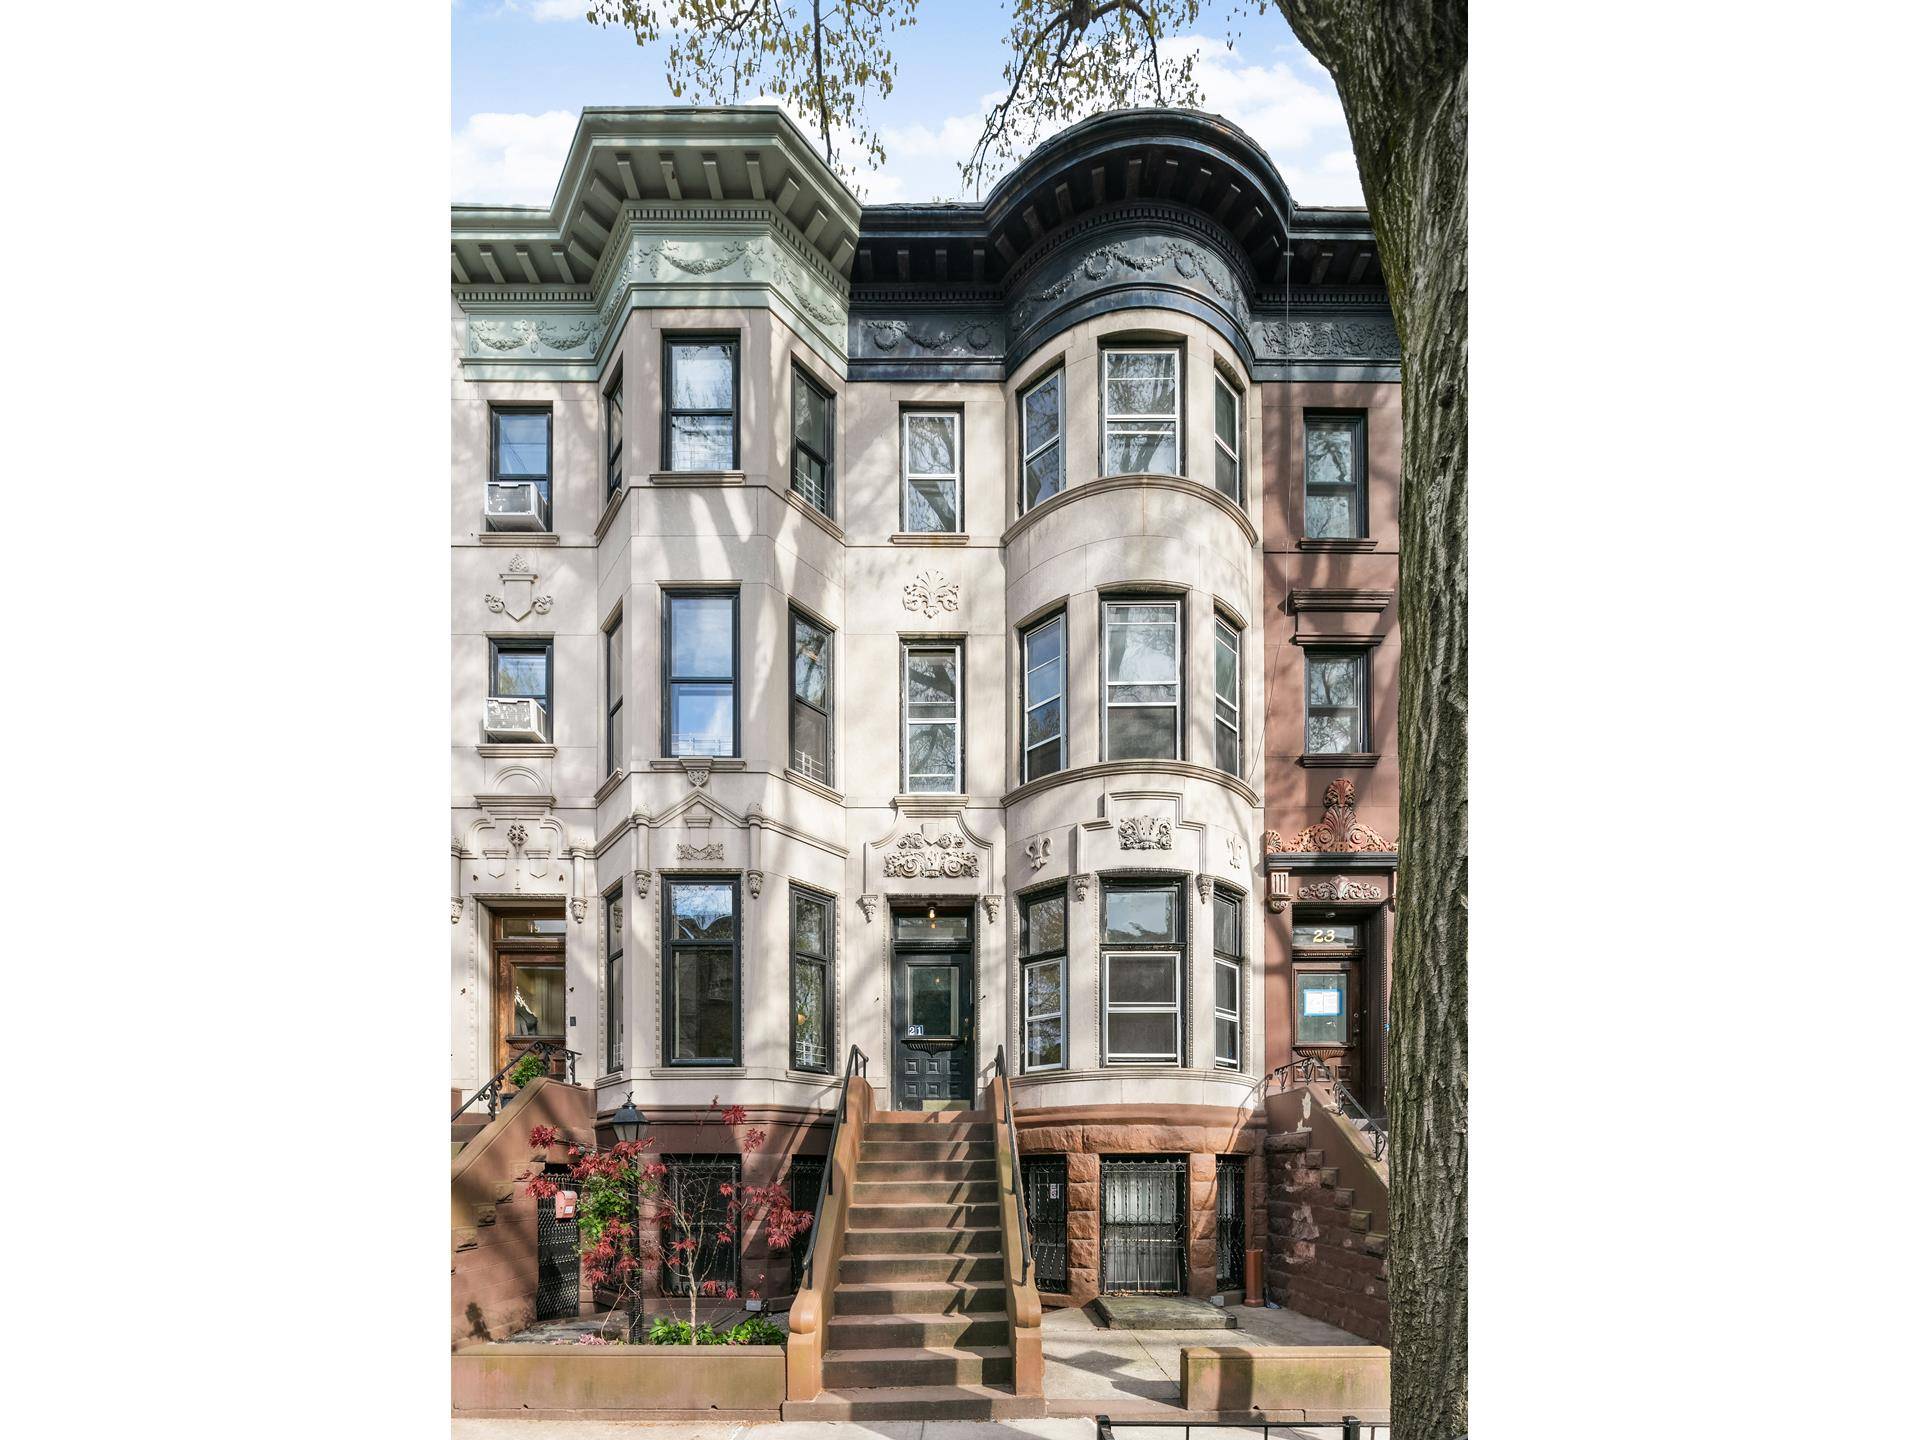 This rarely available vacant home is perfect for investors or those with the desire to create their own home on one of the most desirable streets in Park Slope.